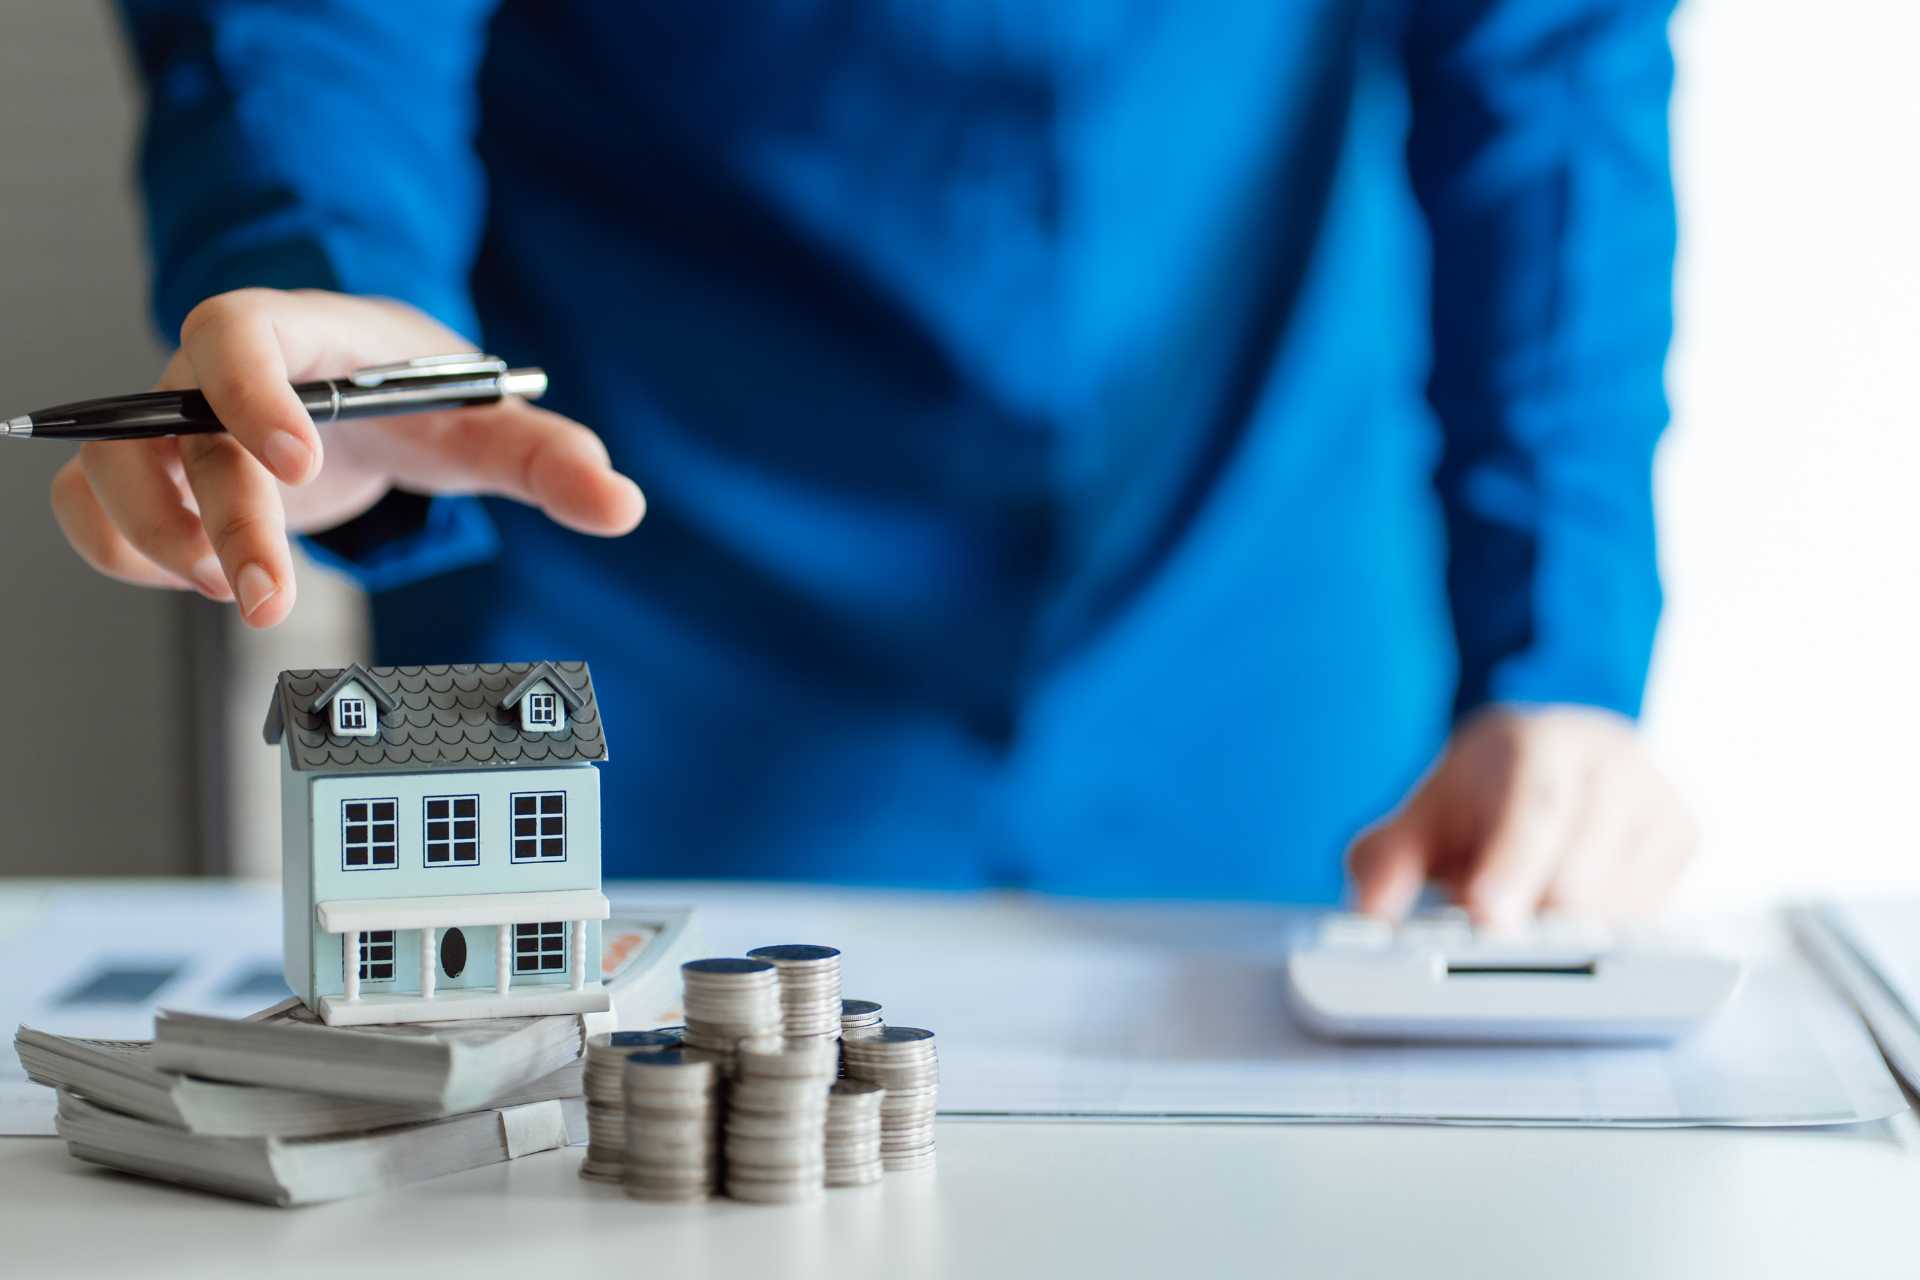 5 Strategies to Save Money as a Home Owner